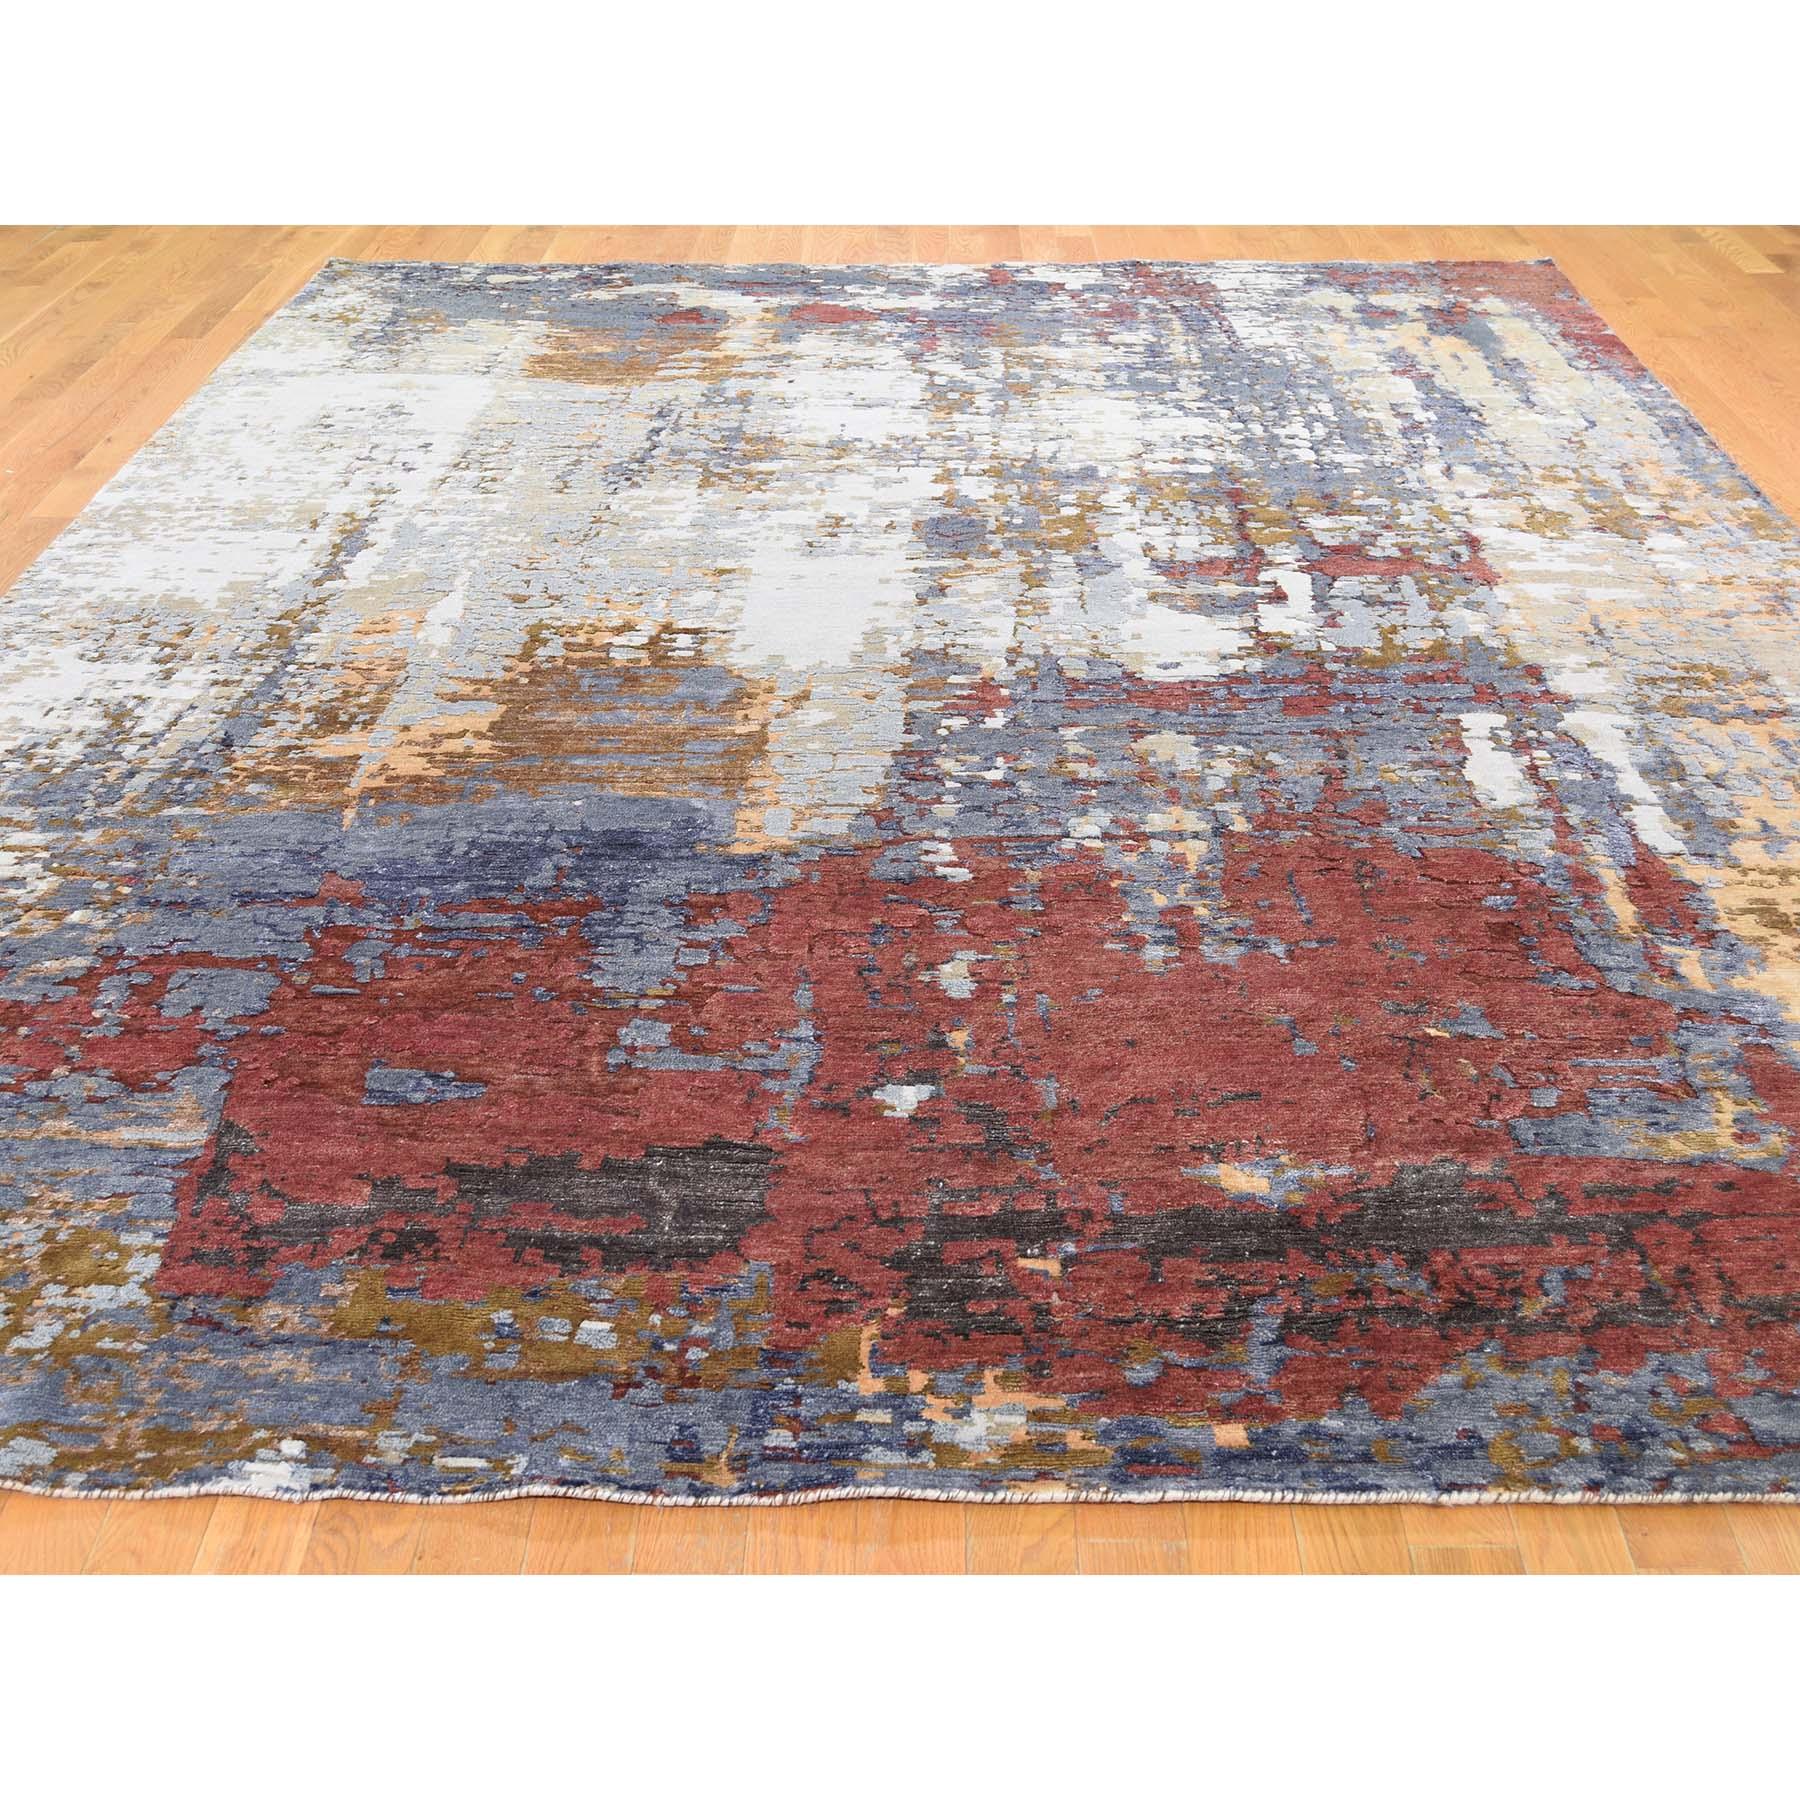 Other Wool and Silk Hi-Low Pile Modern Abstract Design Hand Knotted Rug